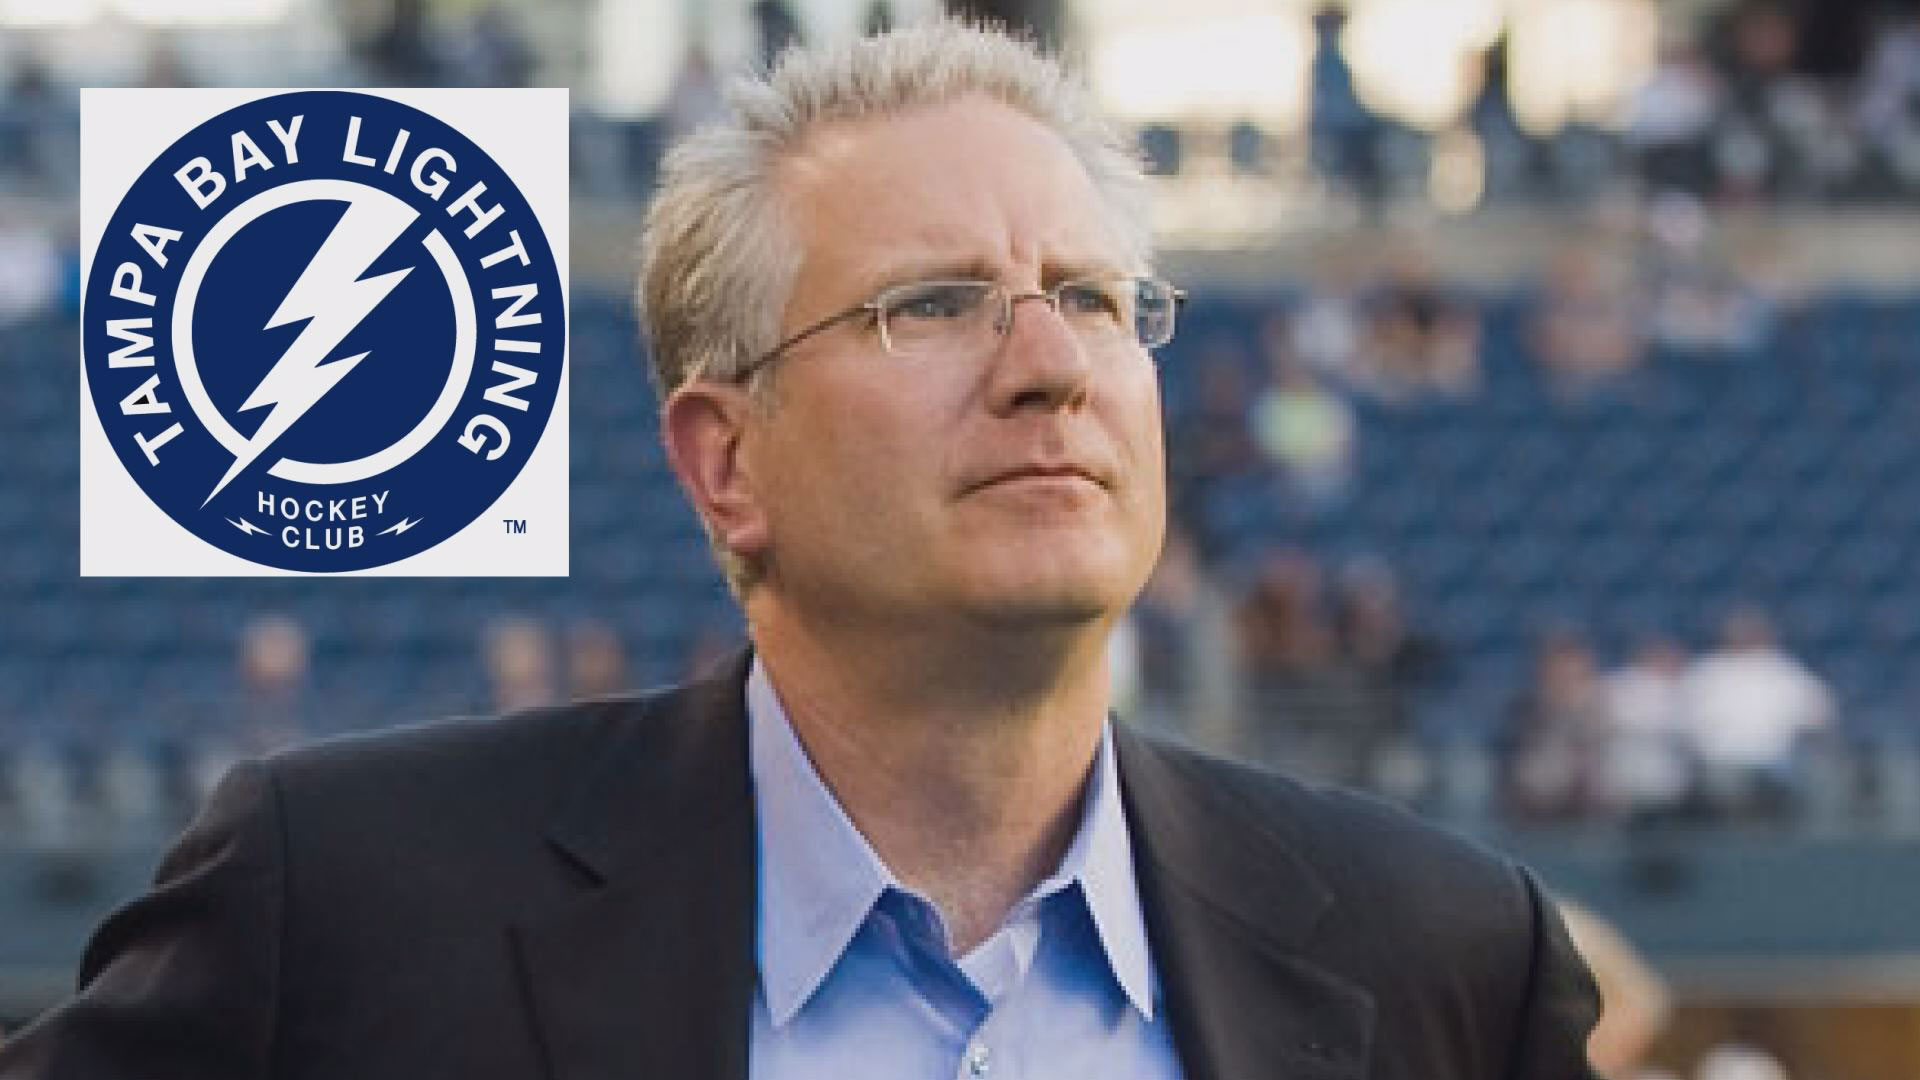 A Blues fan from day one, now all Tod Leiweke wants is a Stanley